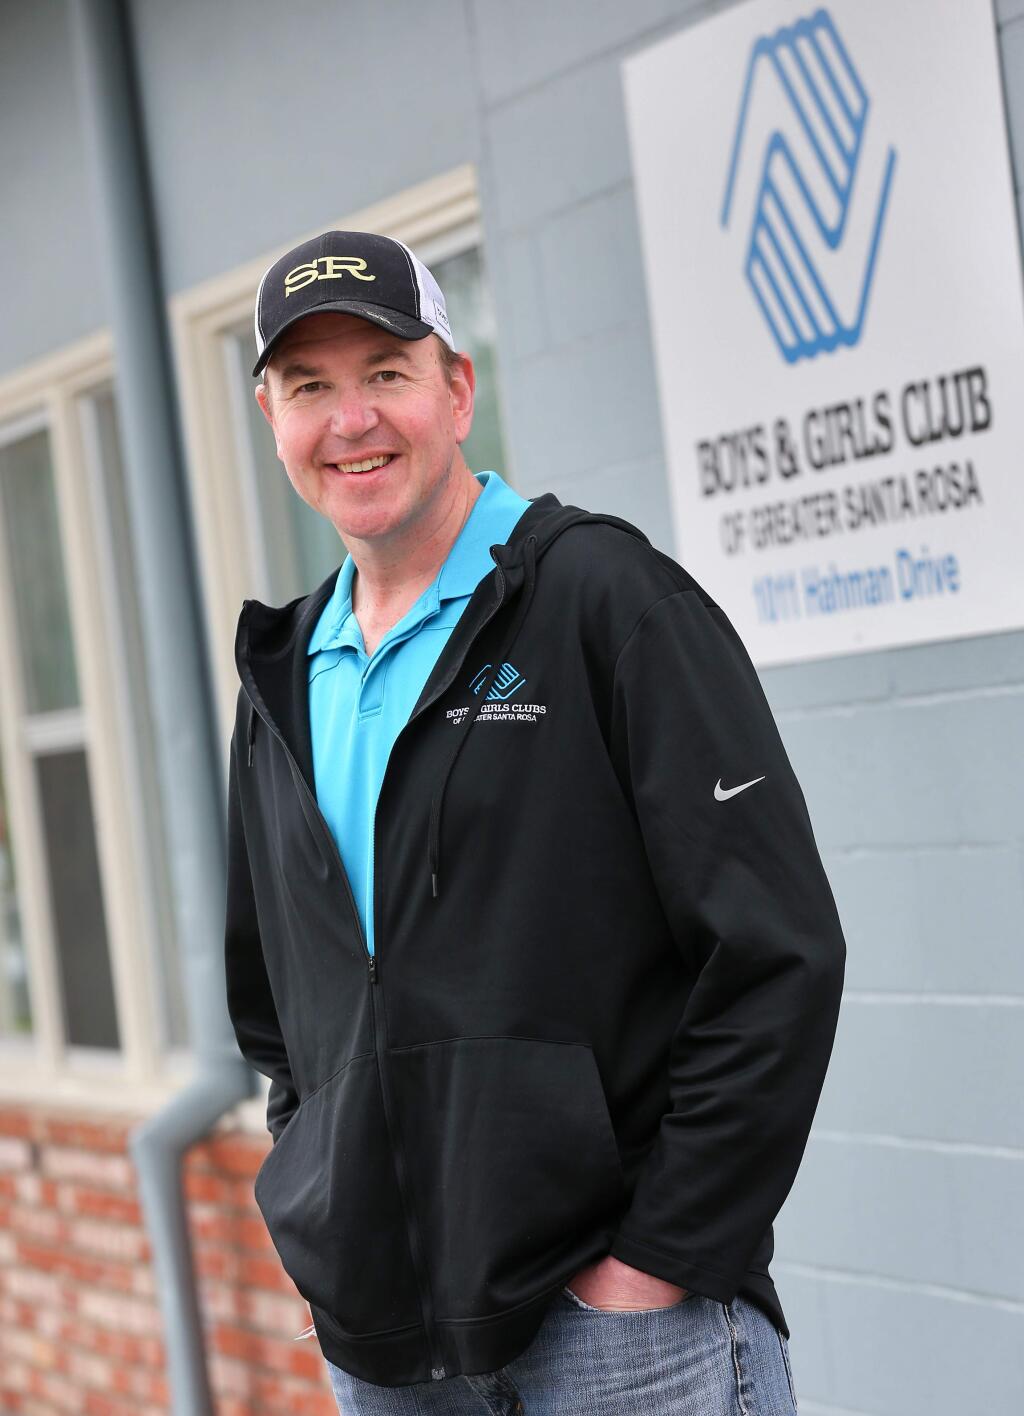 Casey Williams, 43, president-elect of the Santa Rosa West Rotary Club and a board member of the Boys & Girls Club in Santa Rosa, has been working since the shelter-in-place order to raise money to provide box lunches to hospitality workers. (Christopher Chung / The Press Democrat)